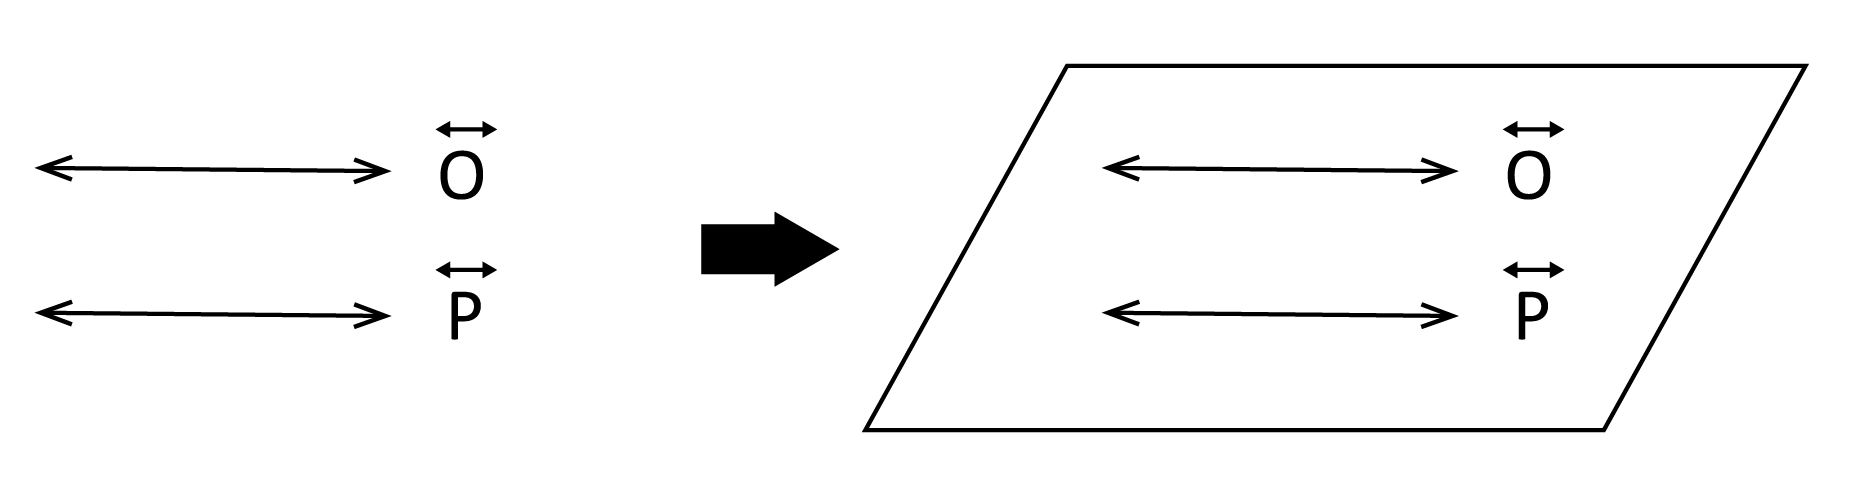 two parallel horizontal lines labeled "Line O" and "line P" with a parallelogram around them